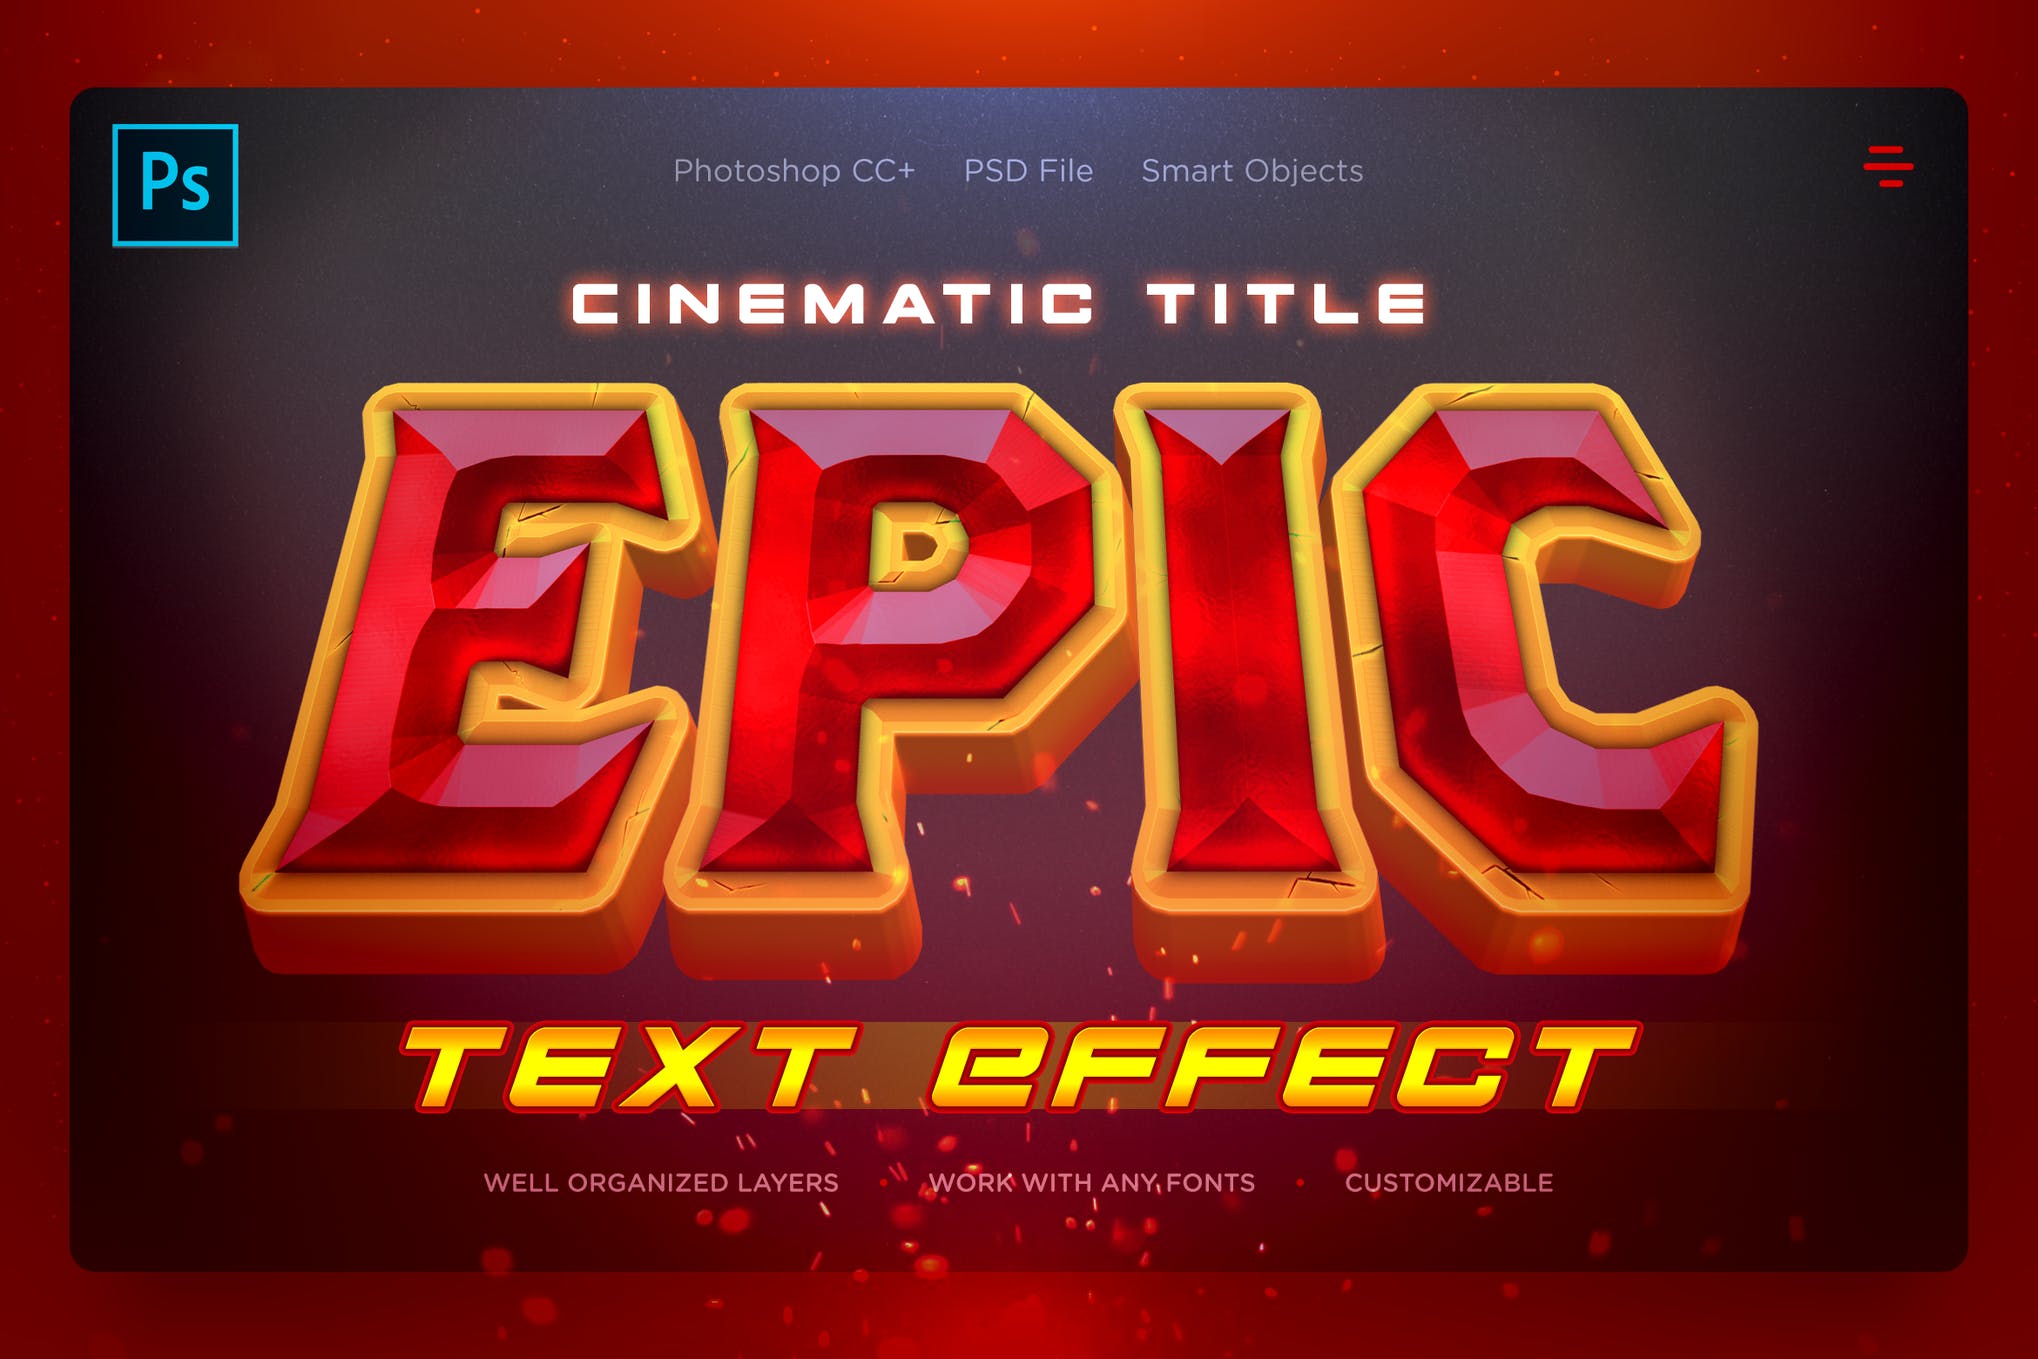 photoshop text effects download